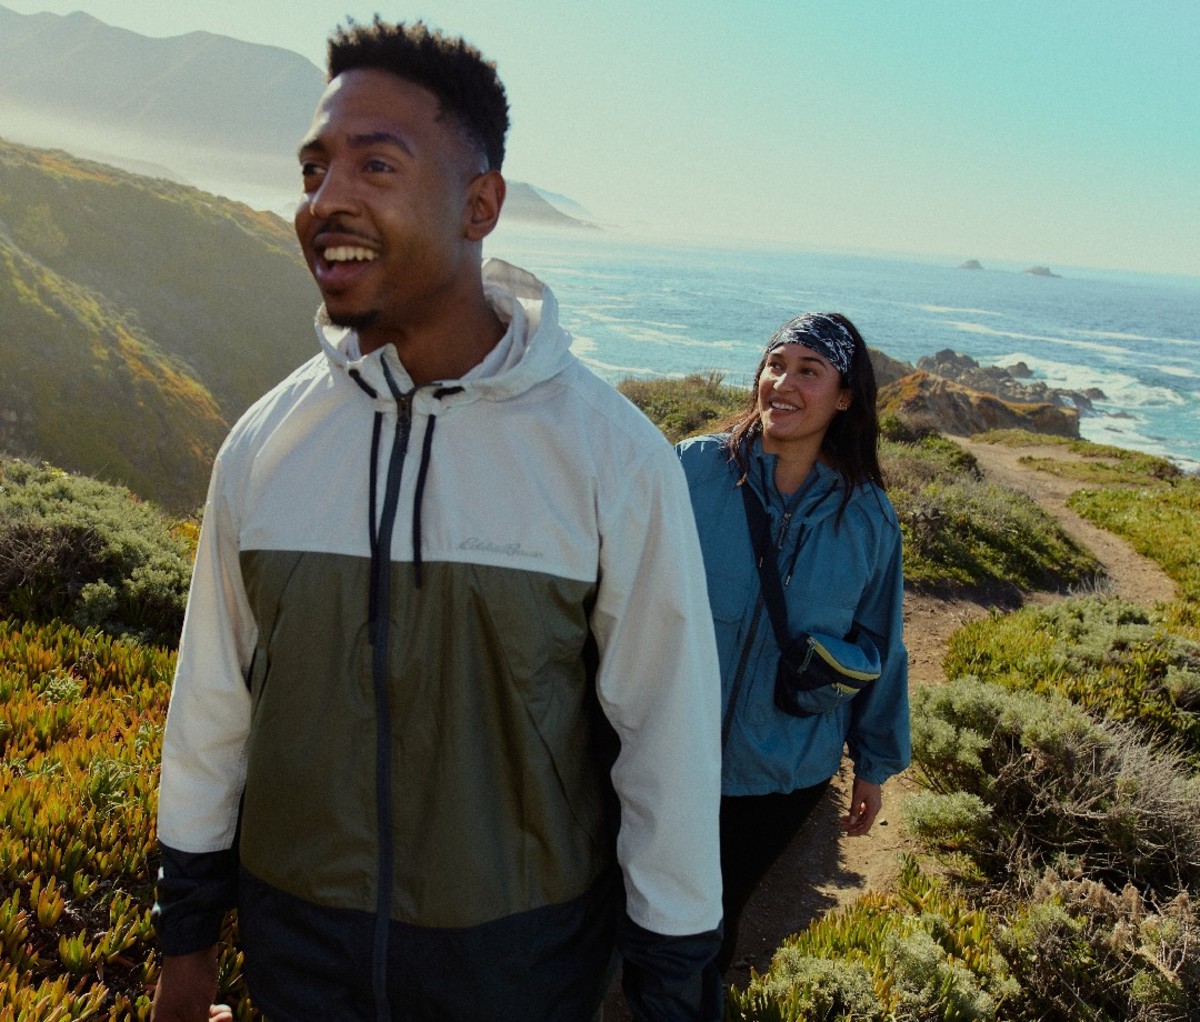 Two hikers smiling while walking along a coastal trail